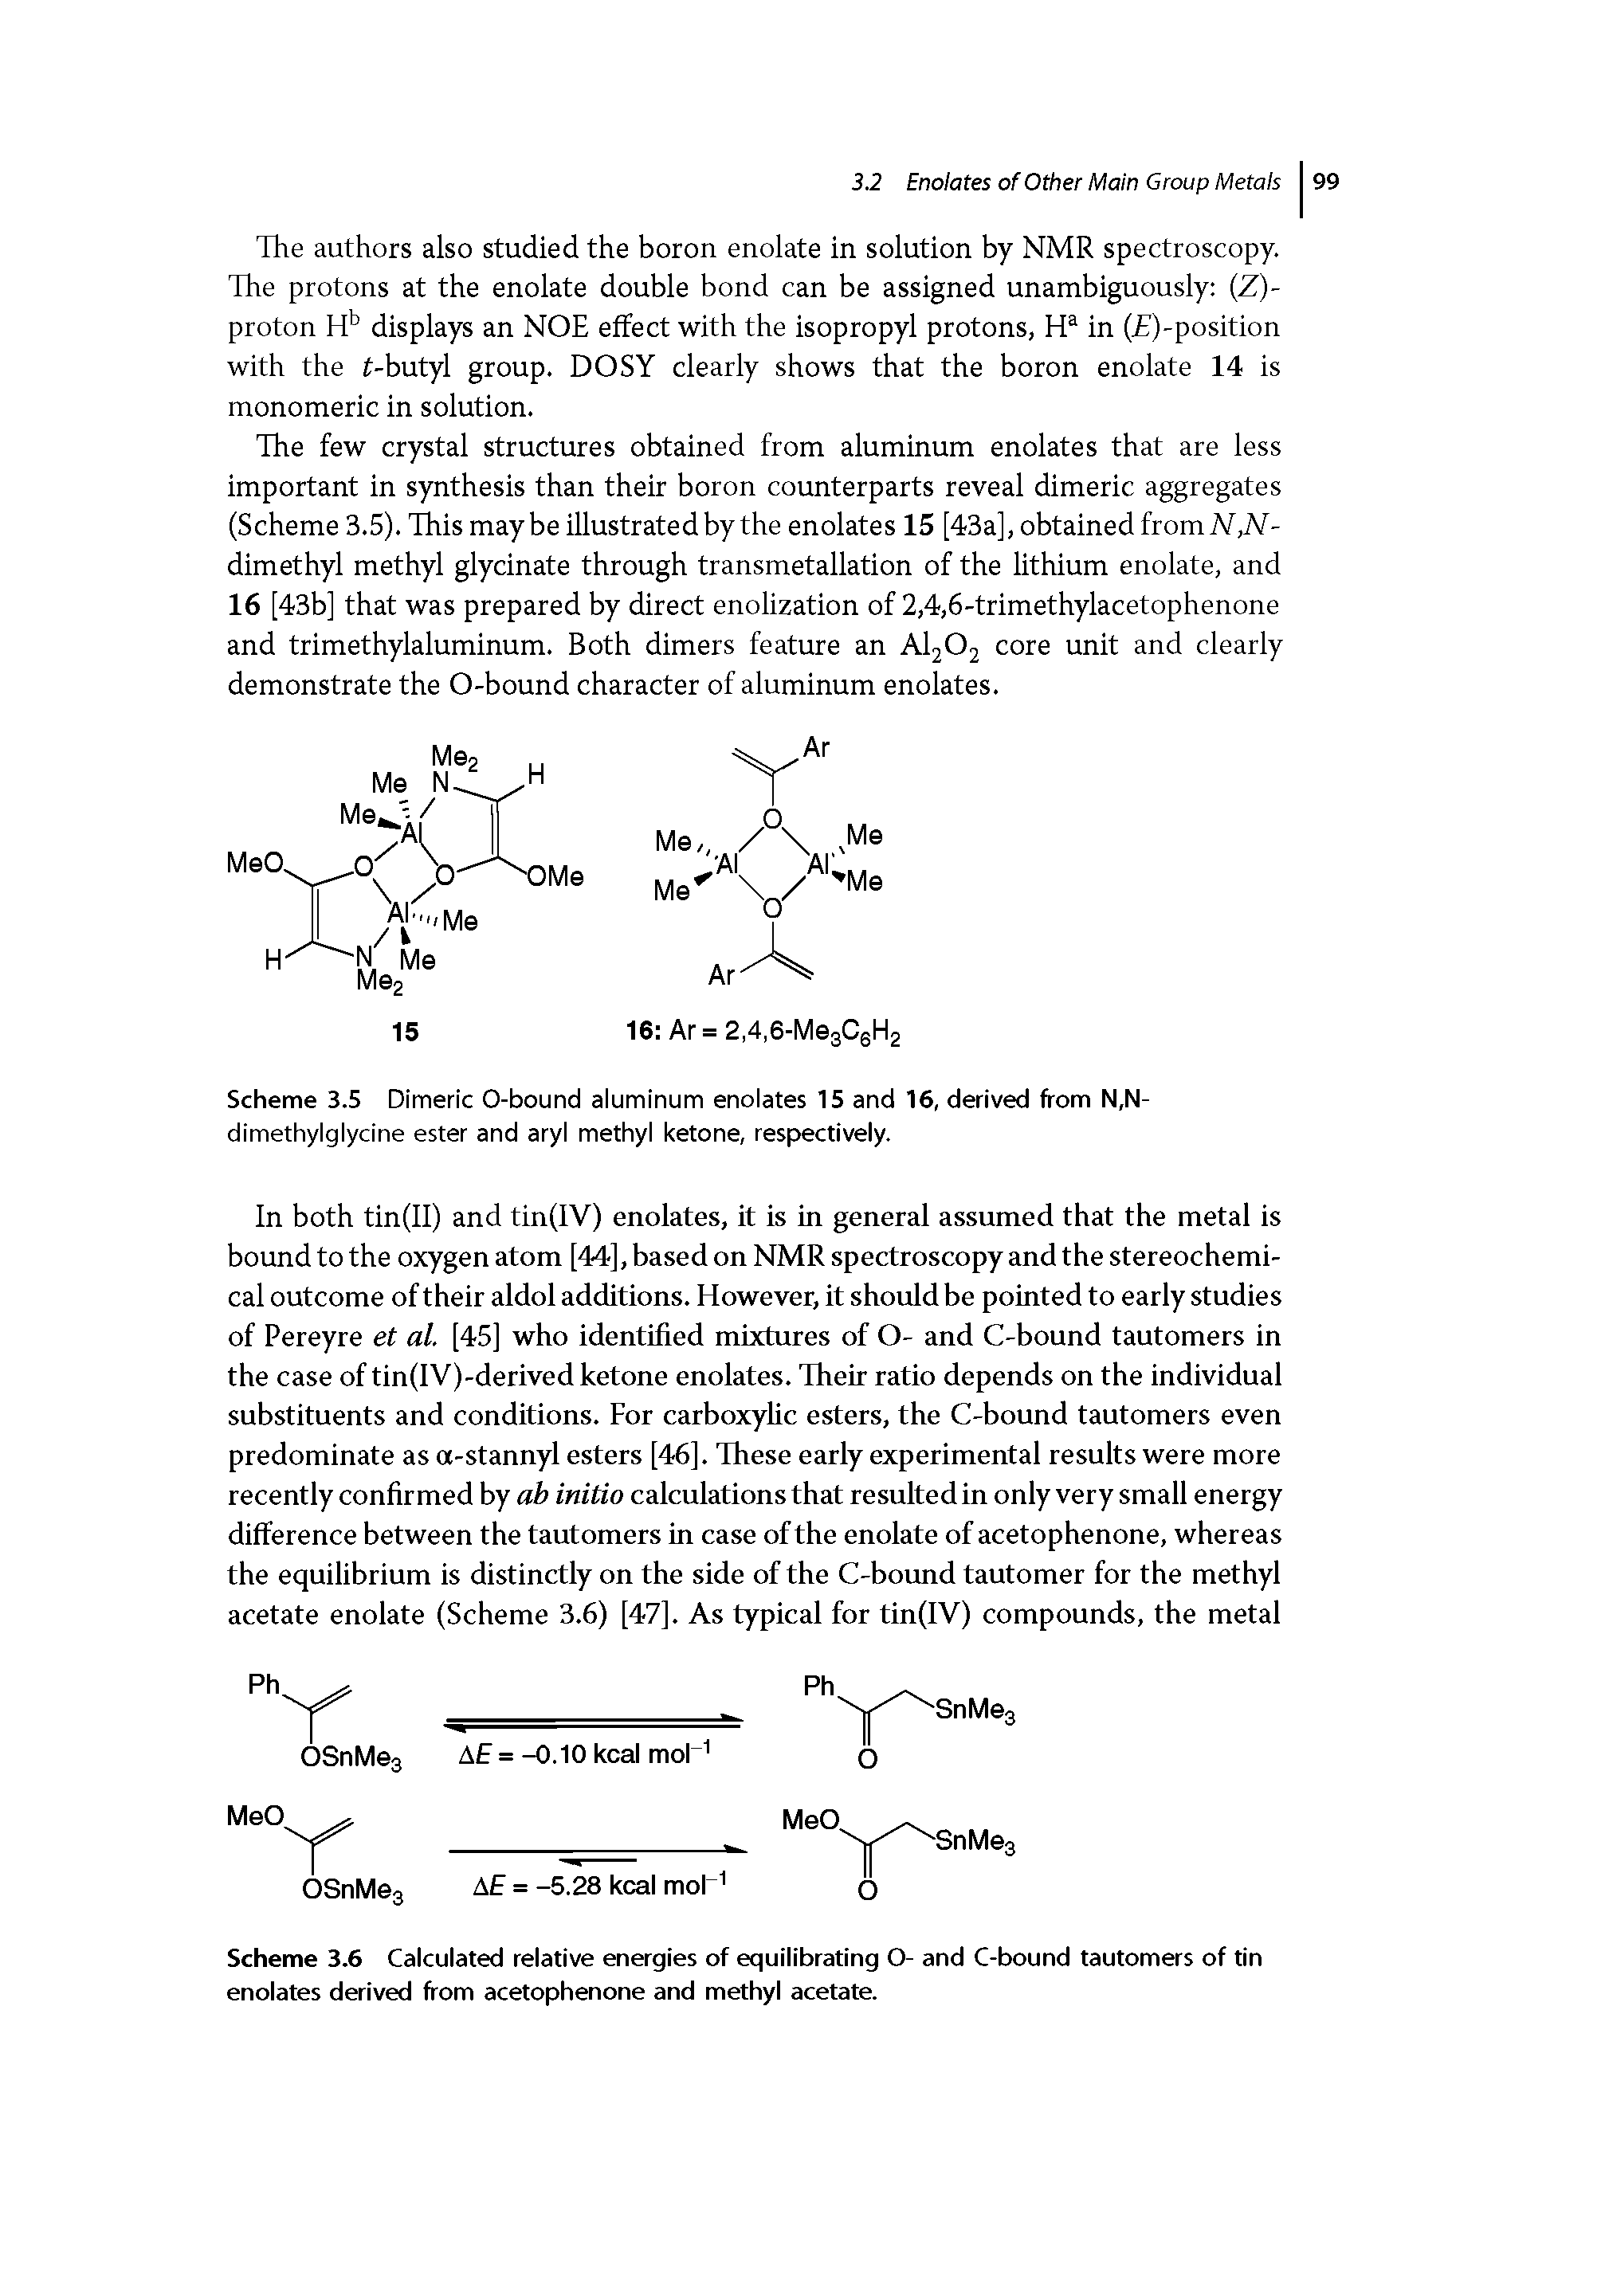 Scheme 3.6 Calculated relative energies of equilibrating O- and C-bound tautomers of tin enolates derived from acetophenone and methyl acetate.